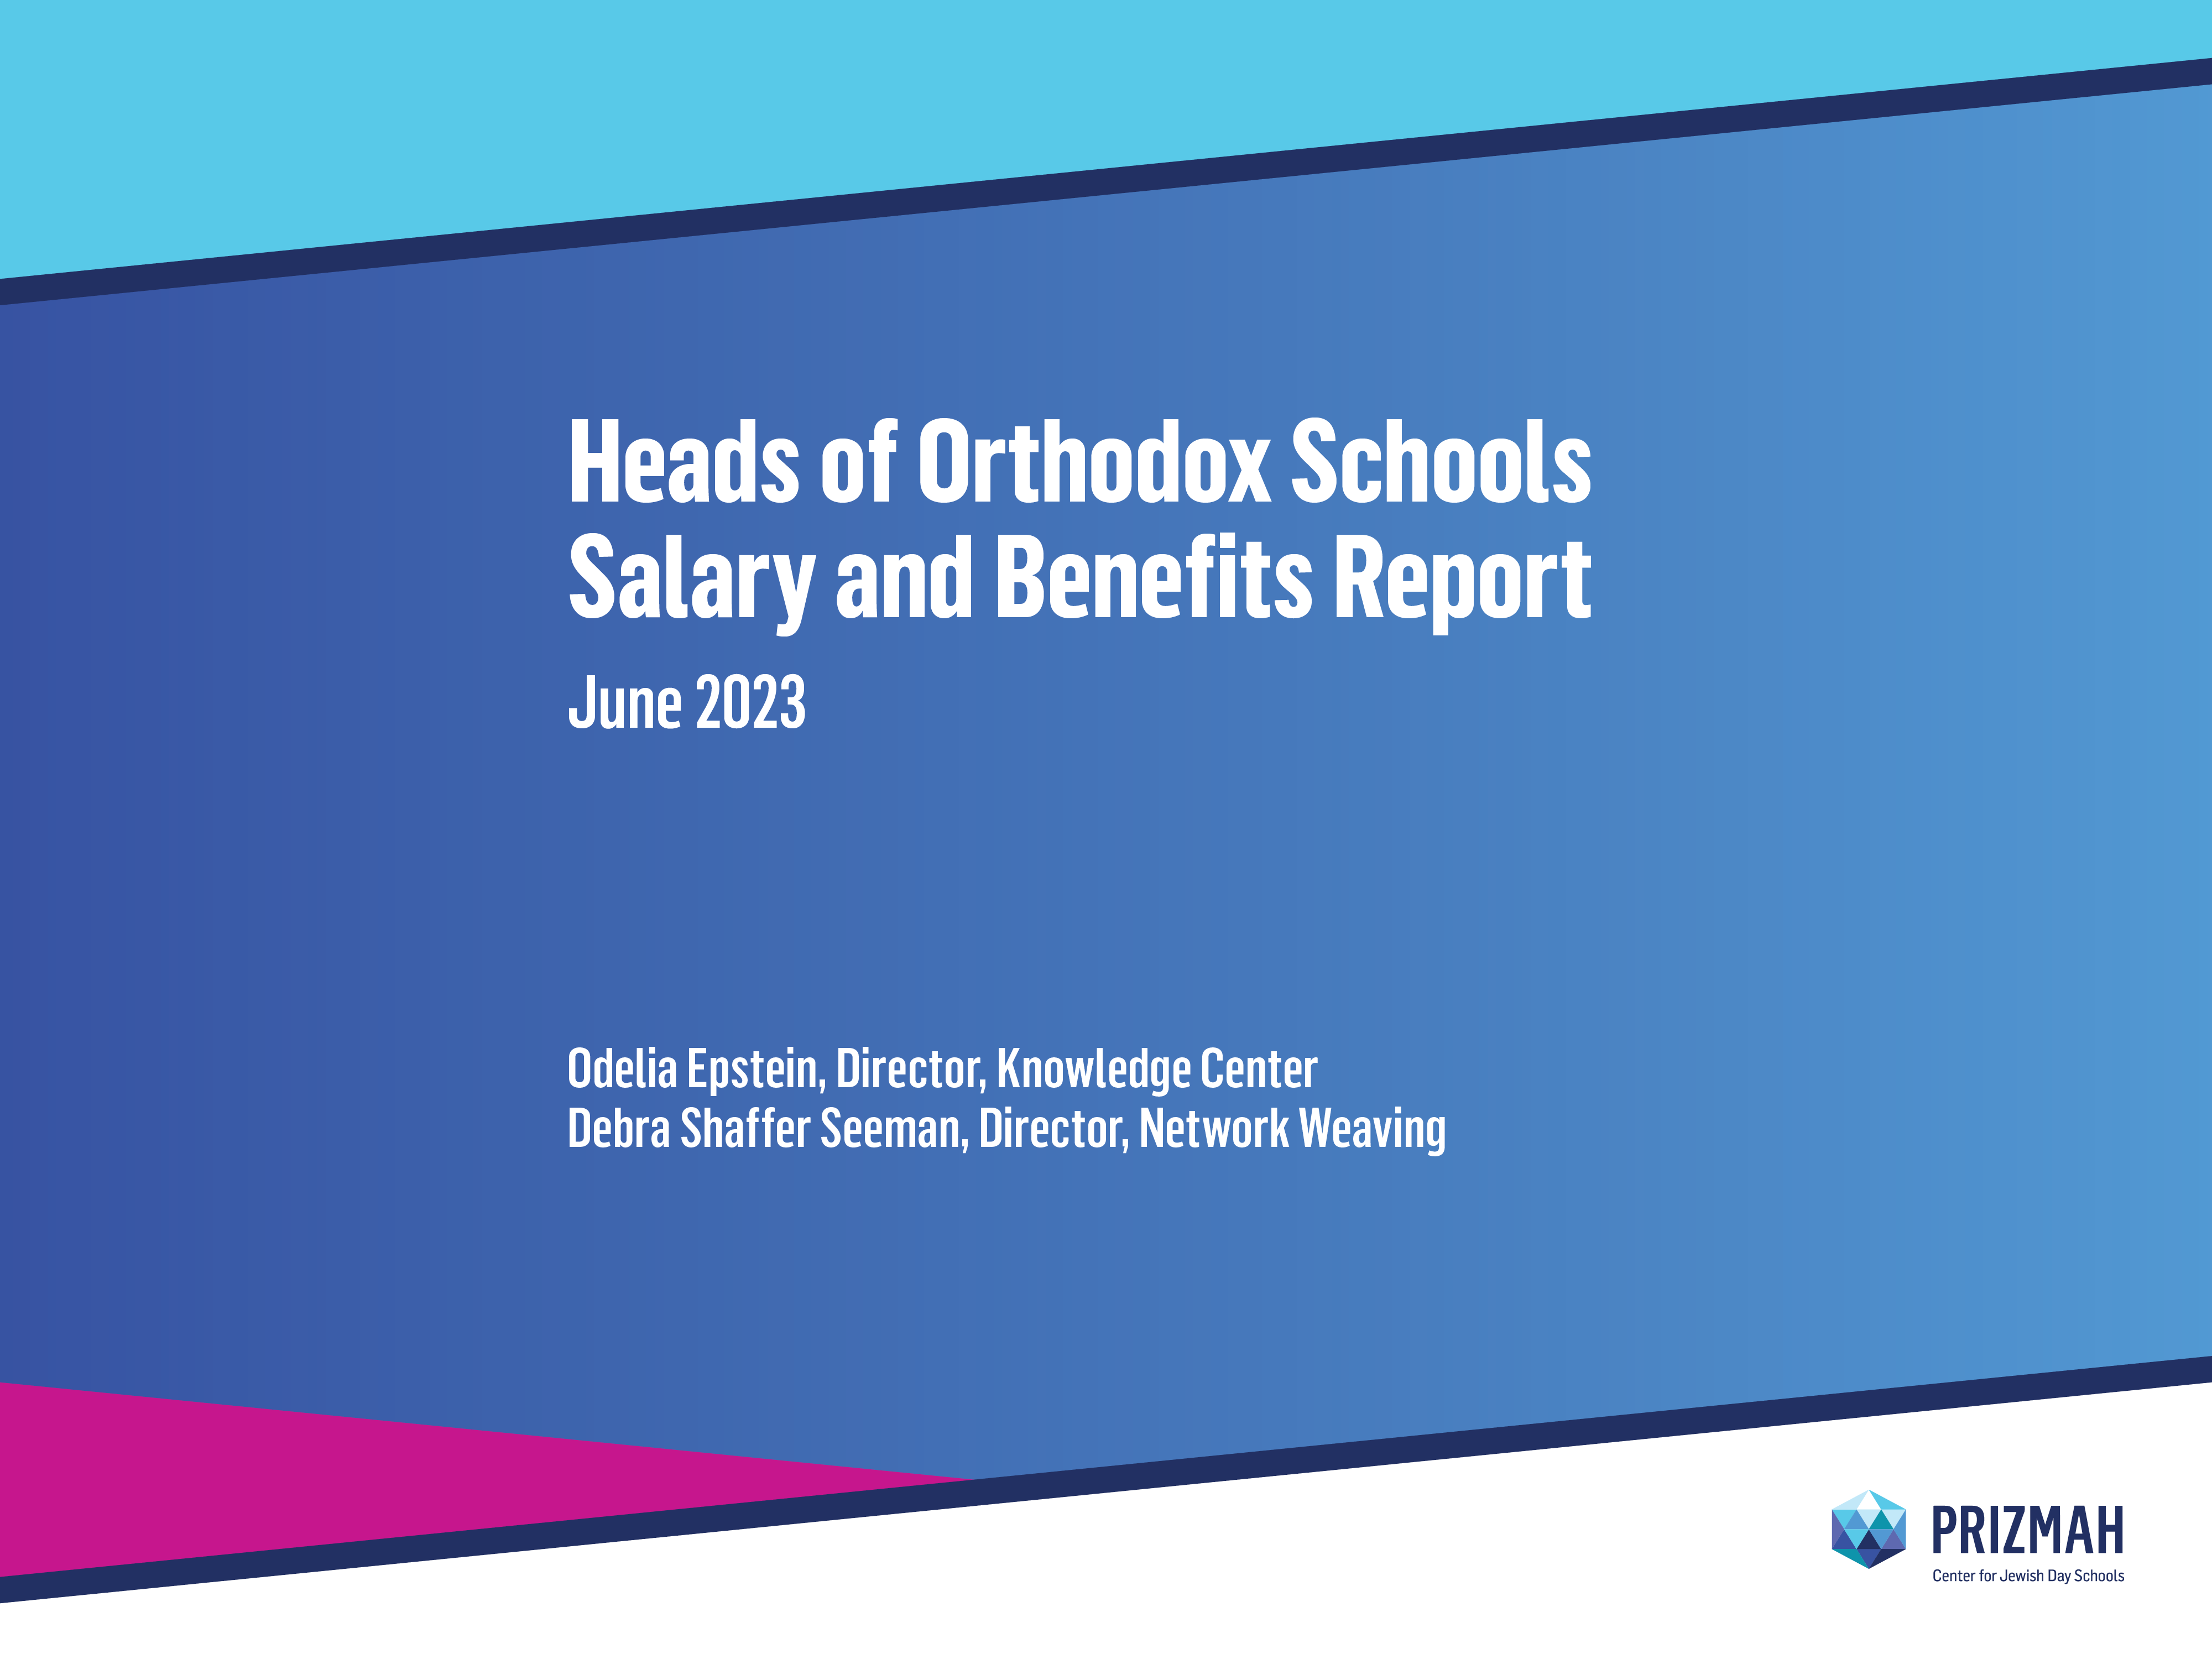 Heads of Orthodox Schools Salary and Benefits Report